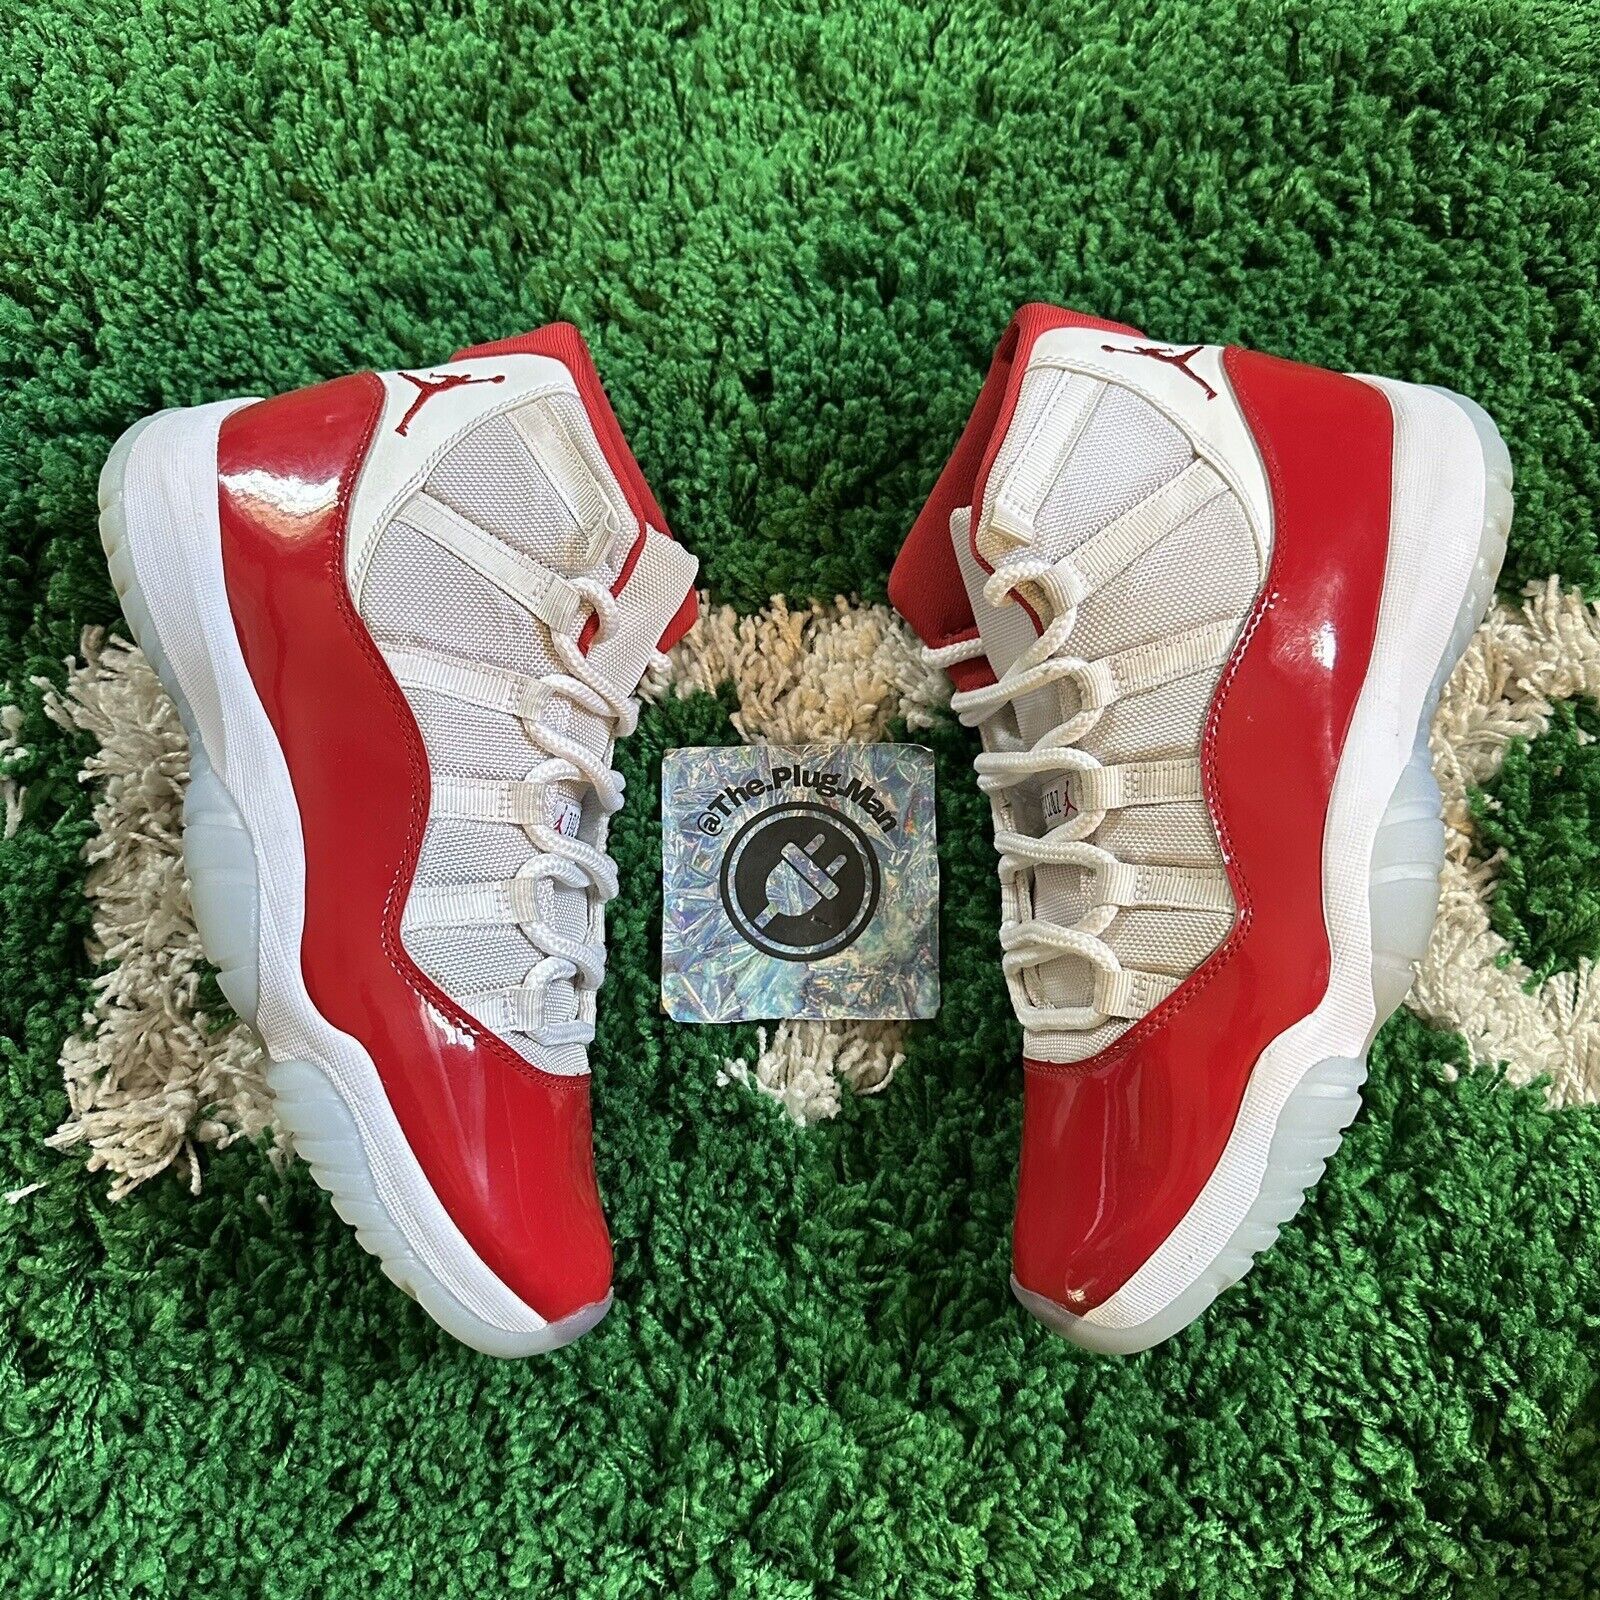 Pre-owned Jordan Brand 11 Retro High Cherry Shoes In Red